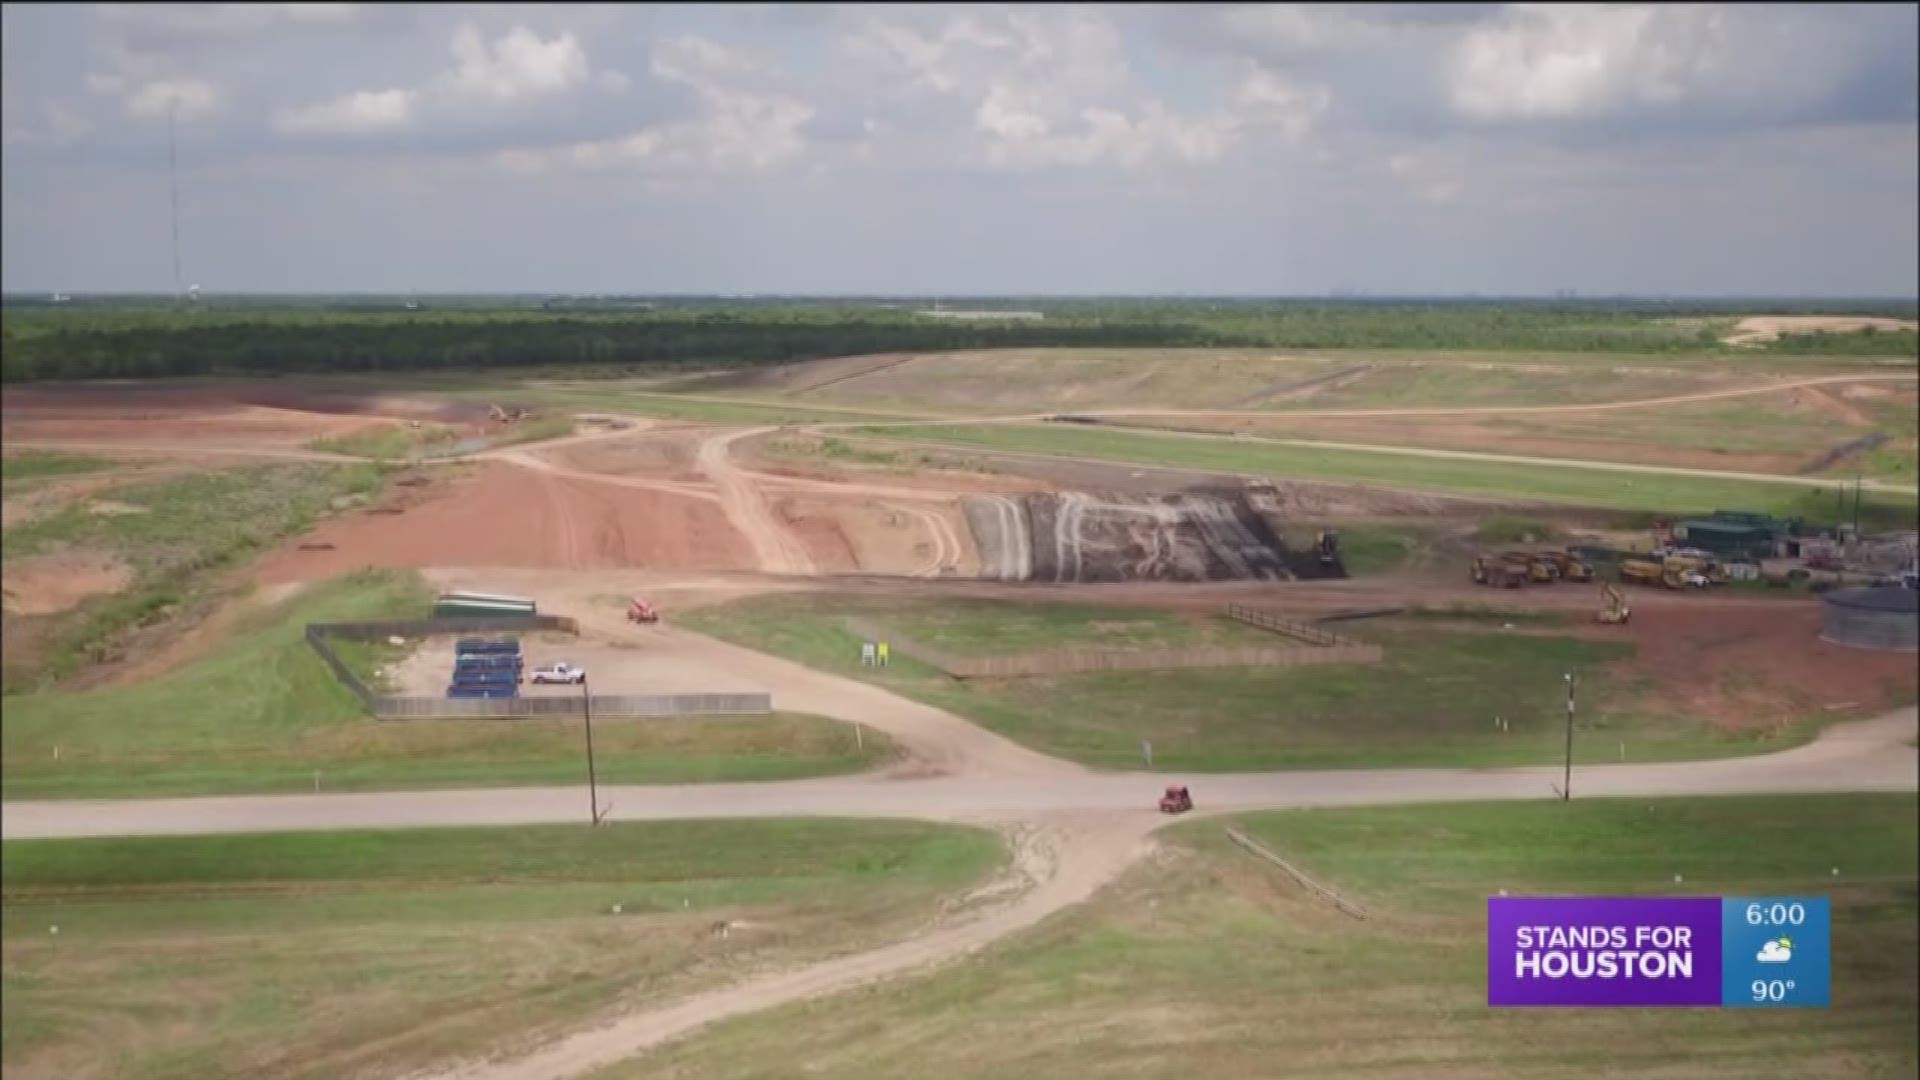 People in Pearland are adding more complaints to the thousands already filed against a local landfill. They say two lawsuits filed against the Blueridge landfill haven't been enough. It still stinks.